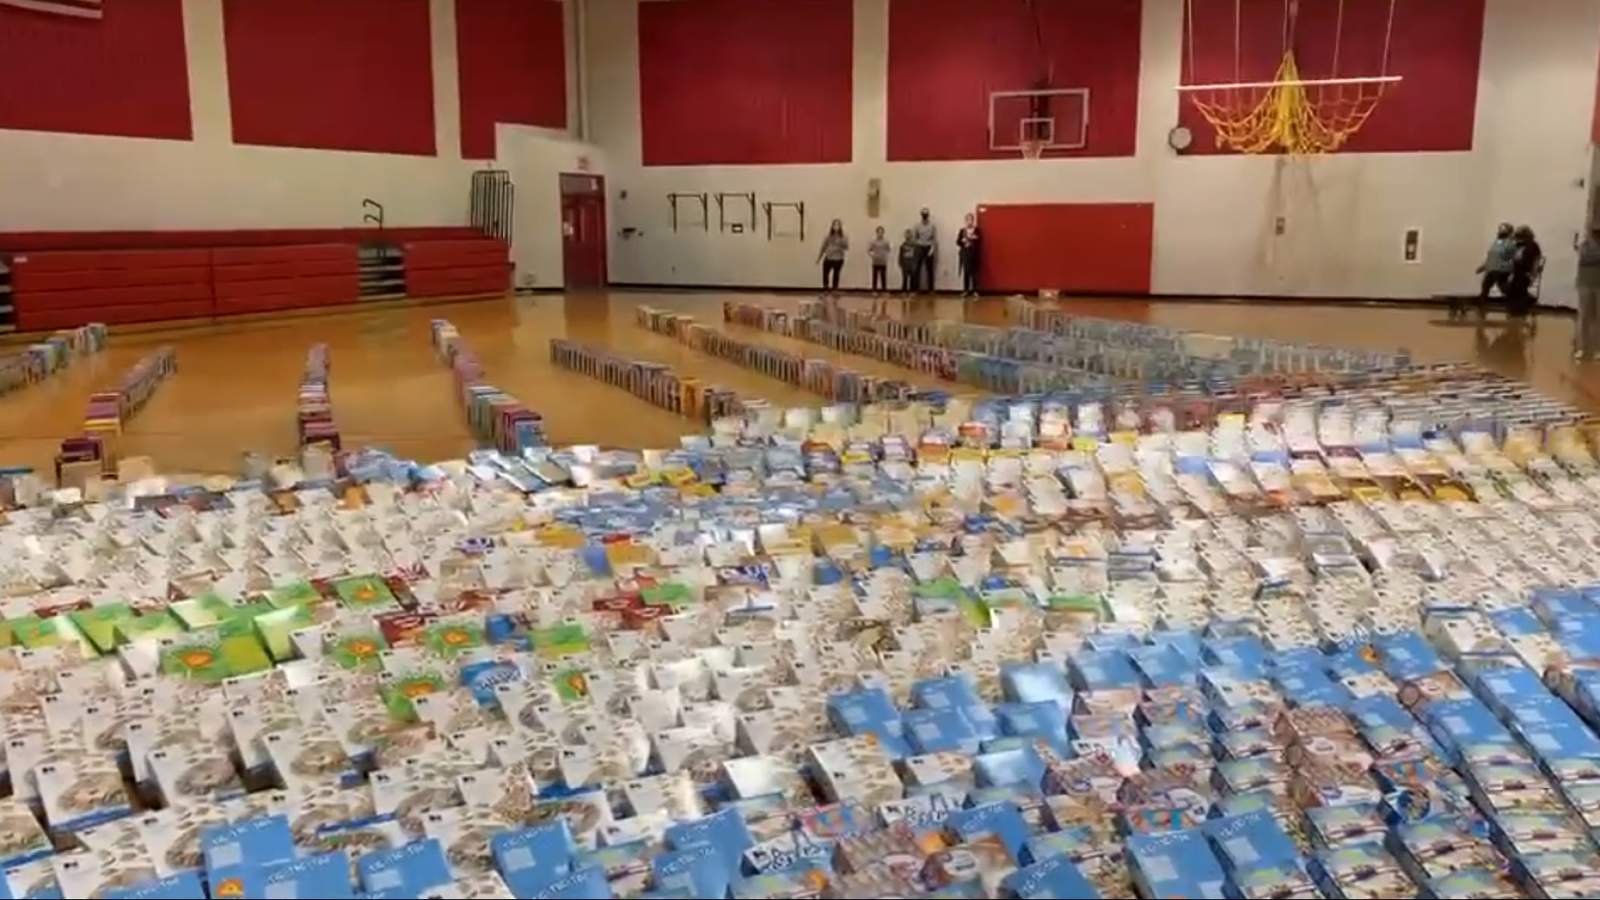 WATCH: Virginia school creates unofficial record-breaking domino run with 4,889 cereal boxes